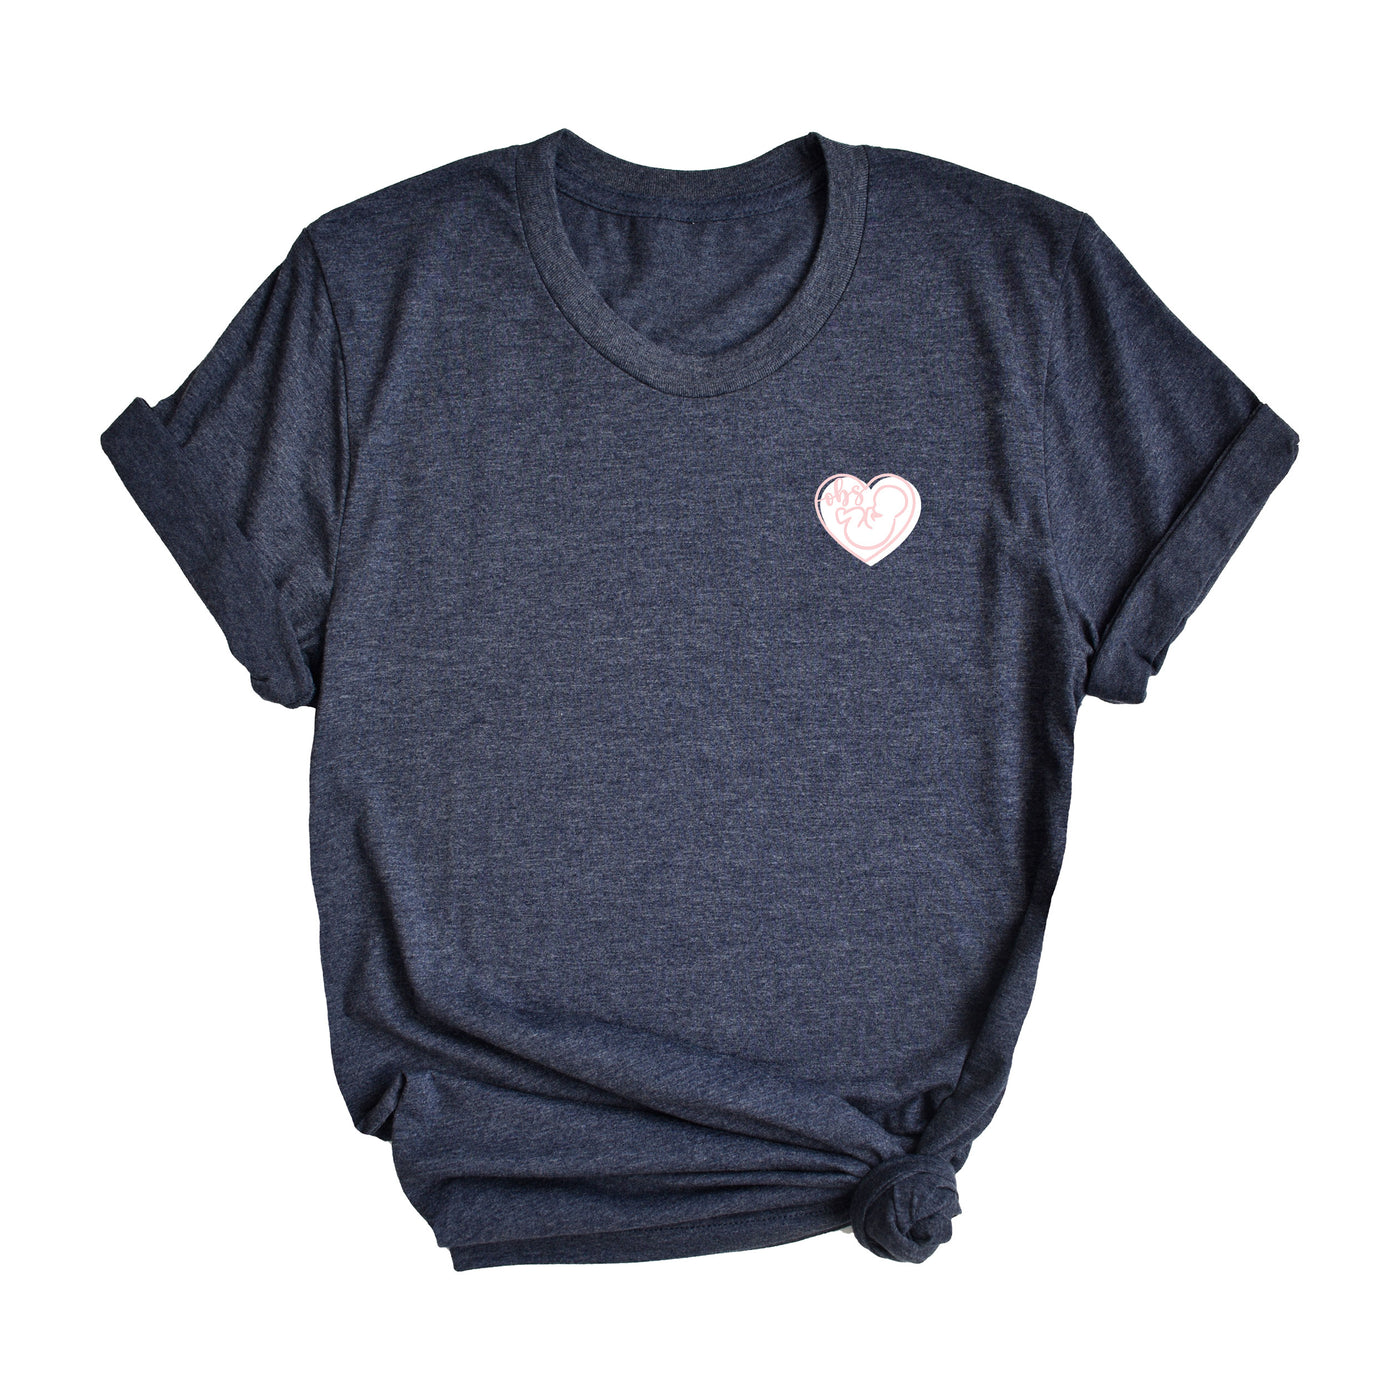 Baby in Heart - Obs - Shirt